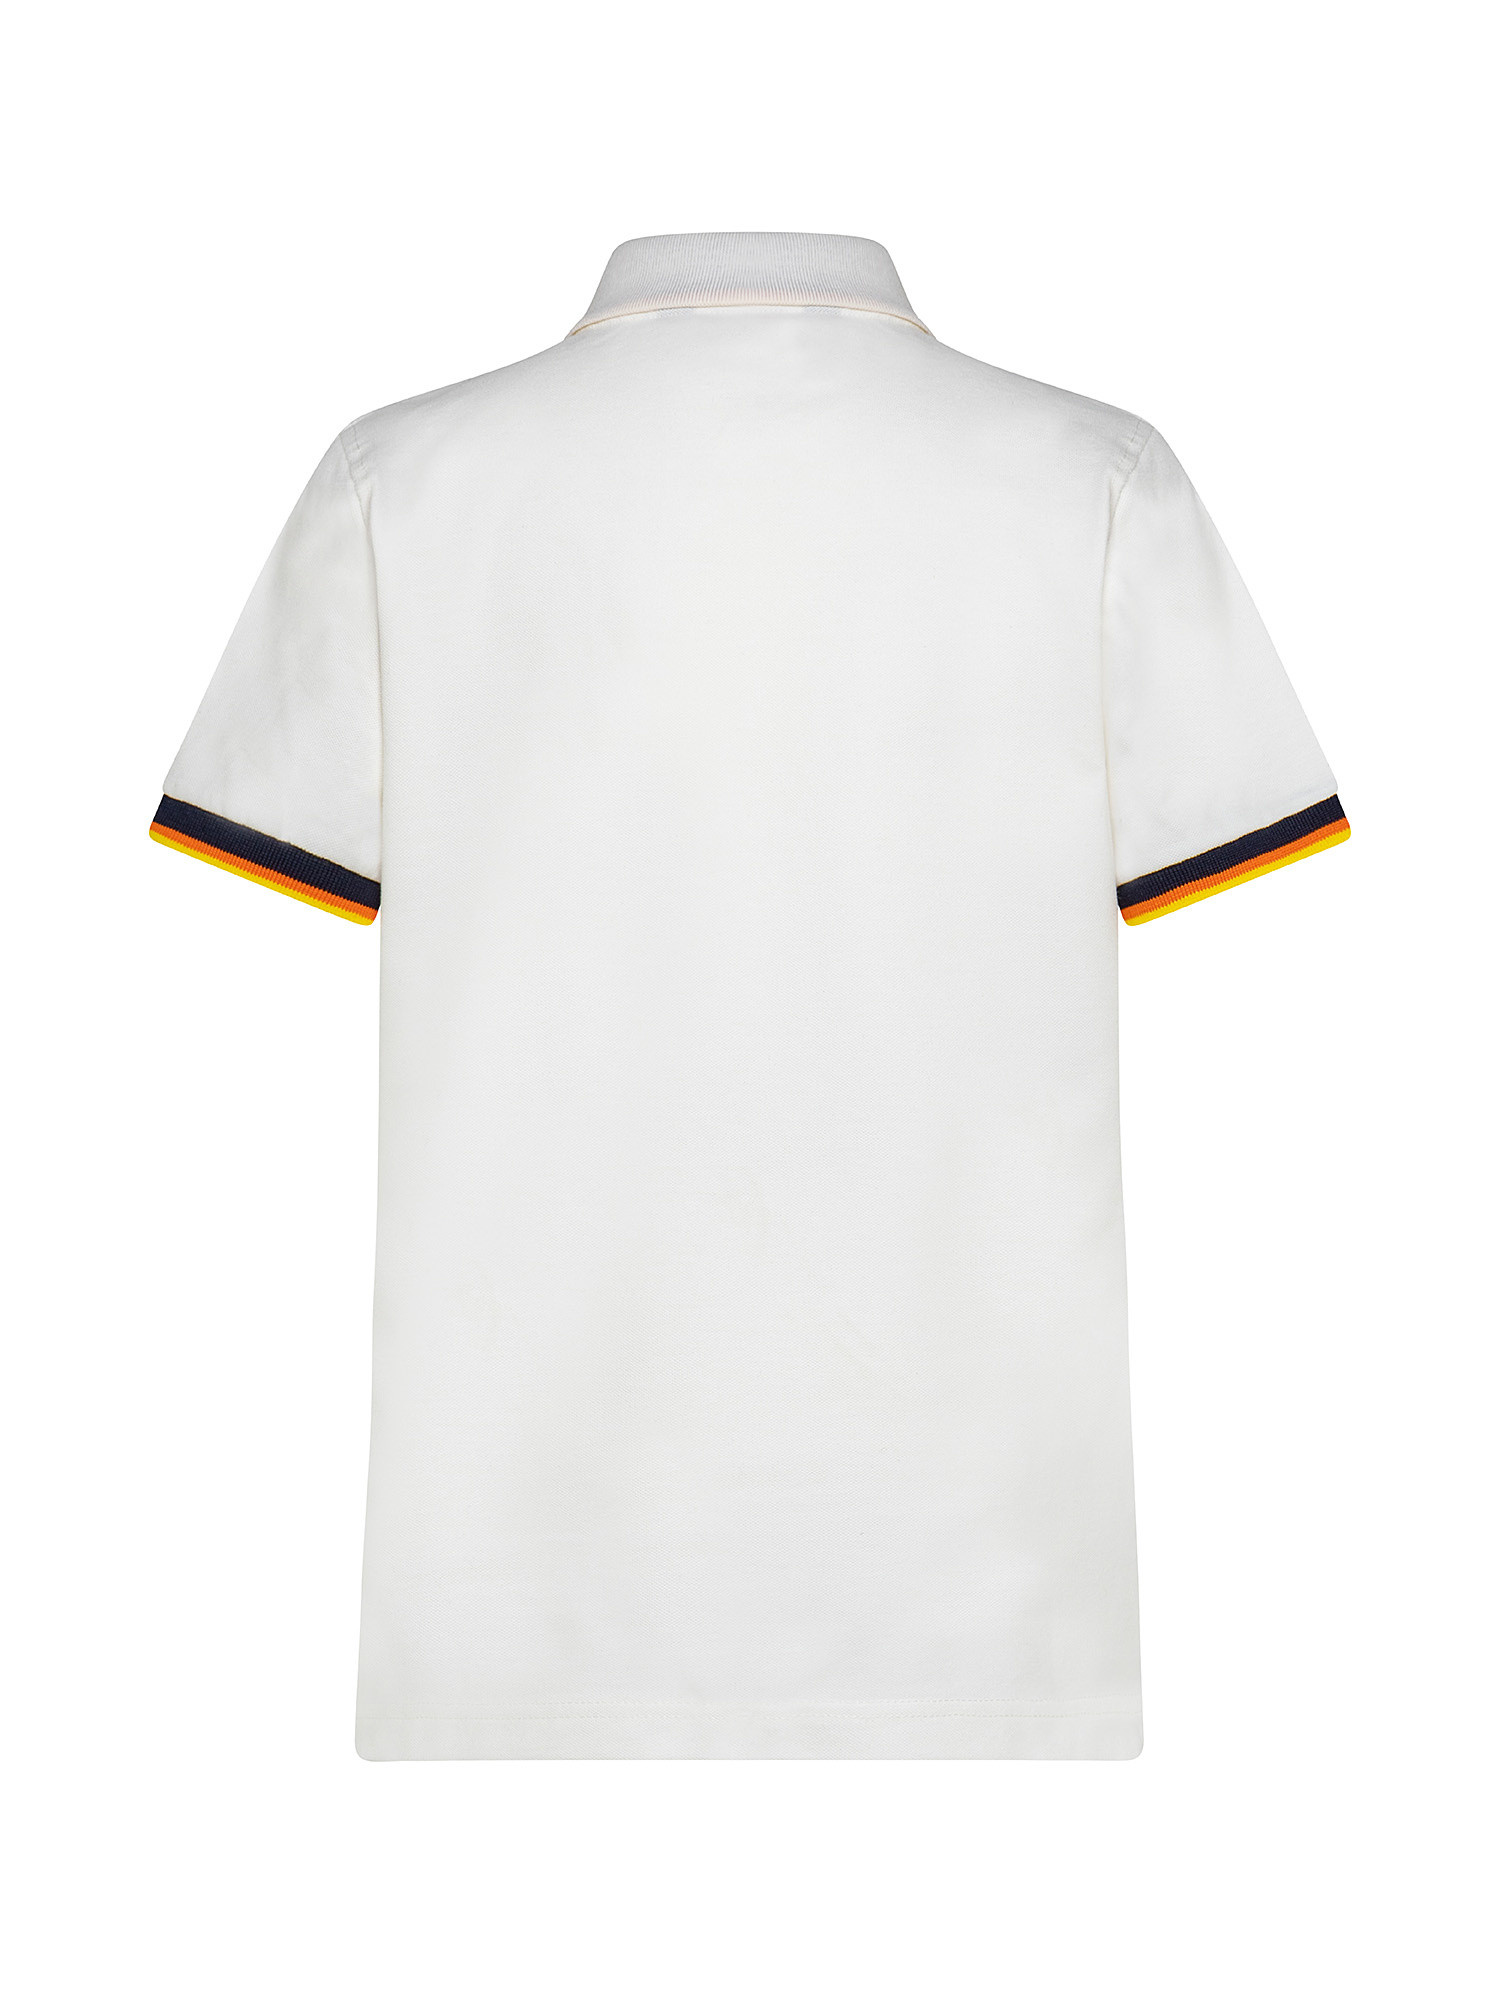 Slim fit boy polo shirt, White, large image number 1